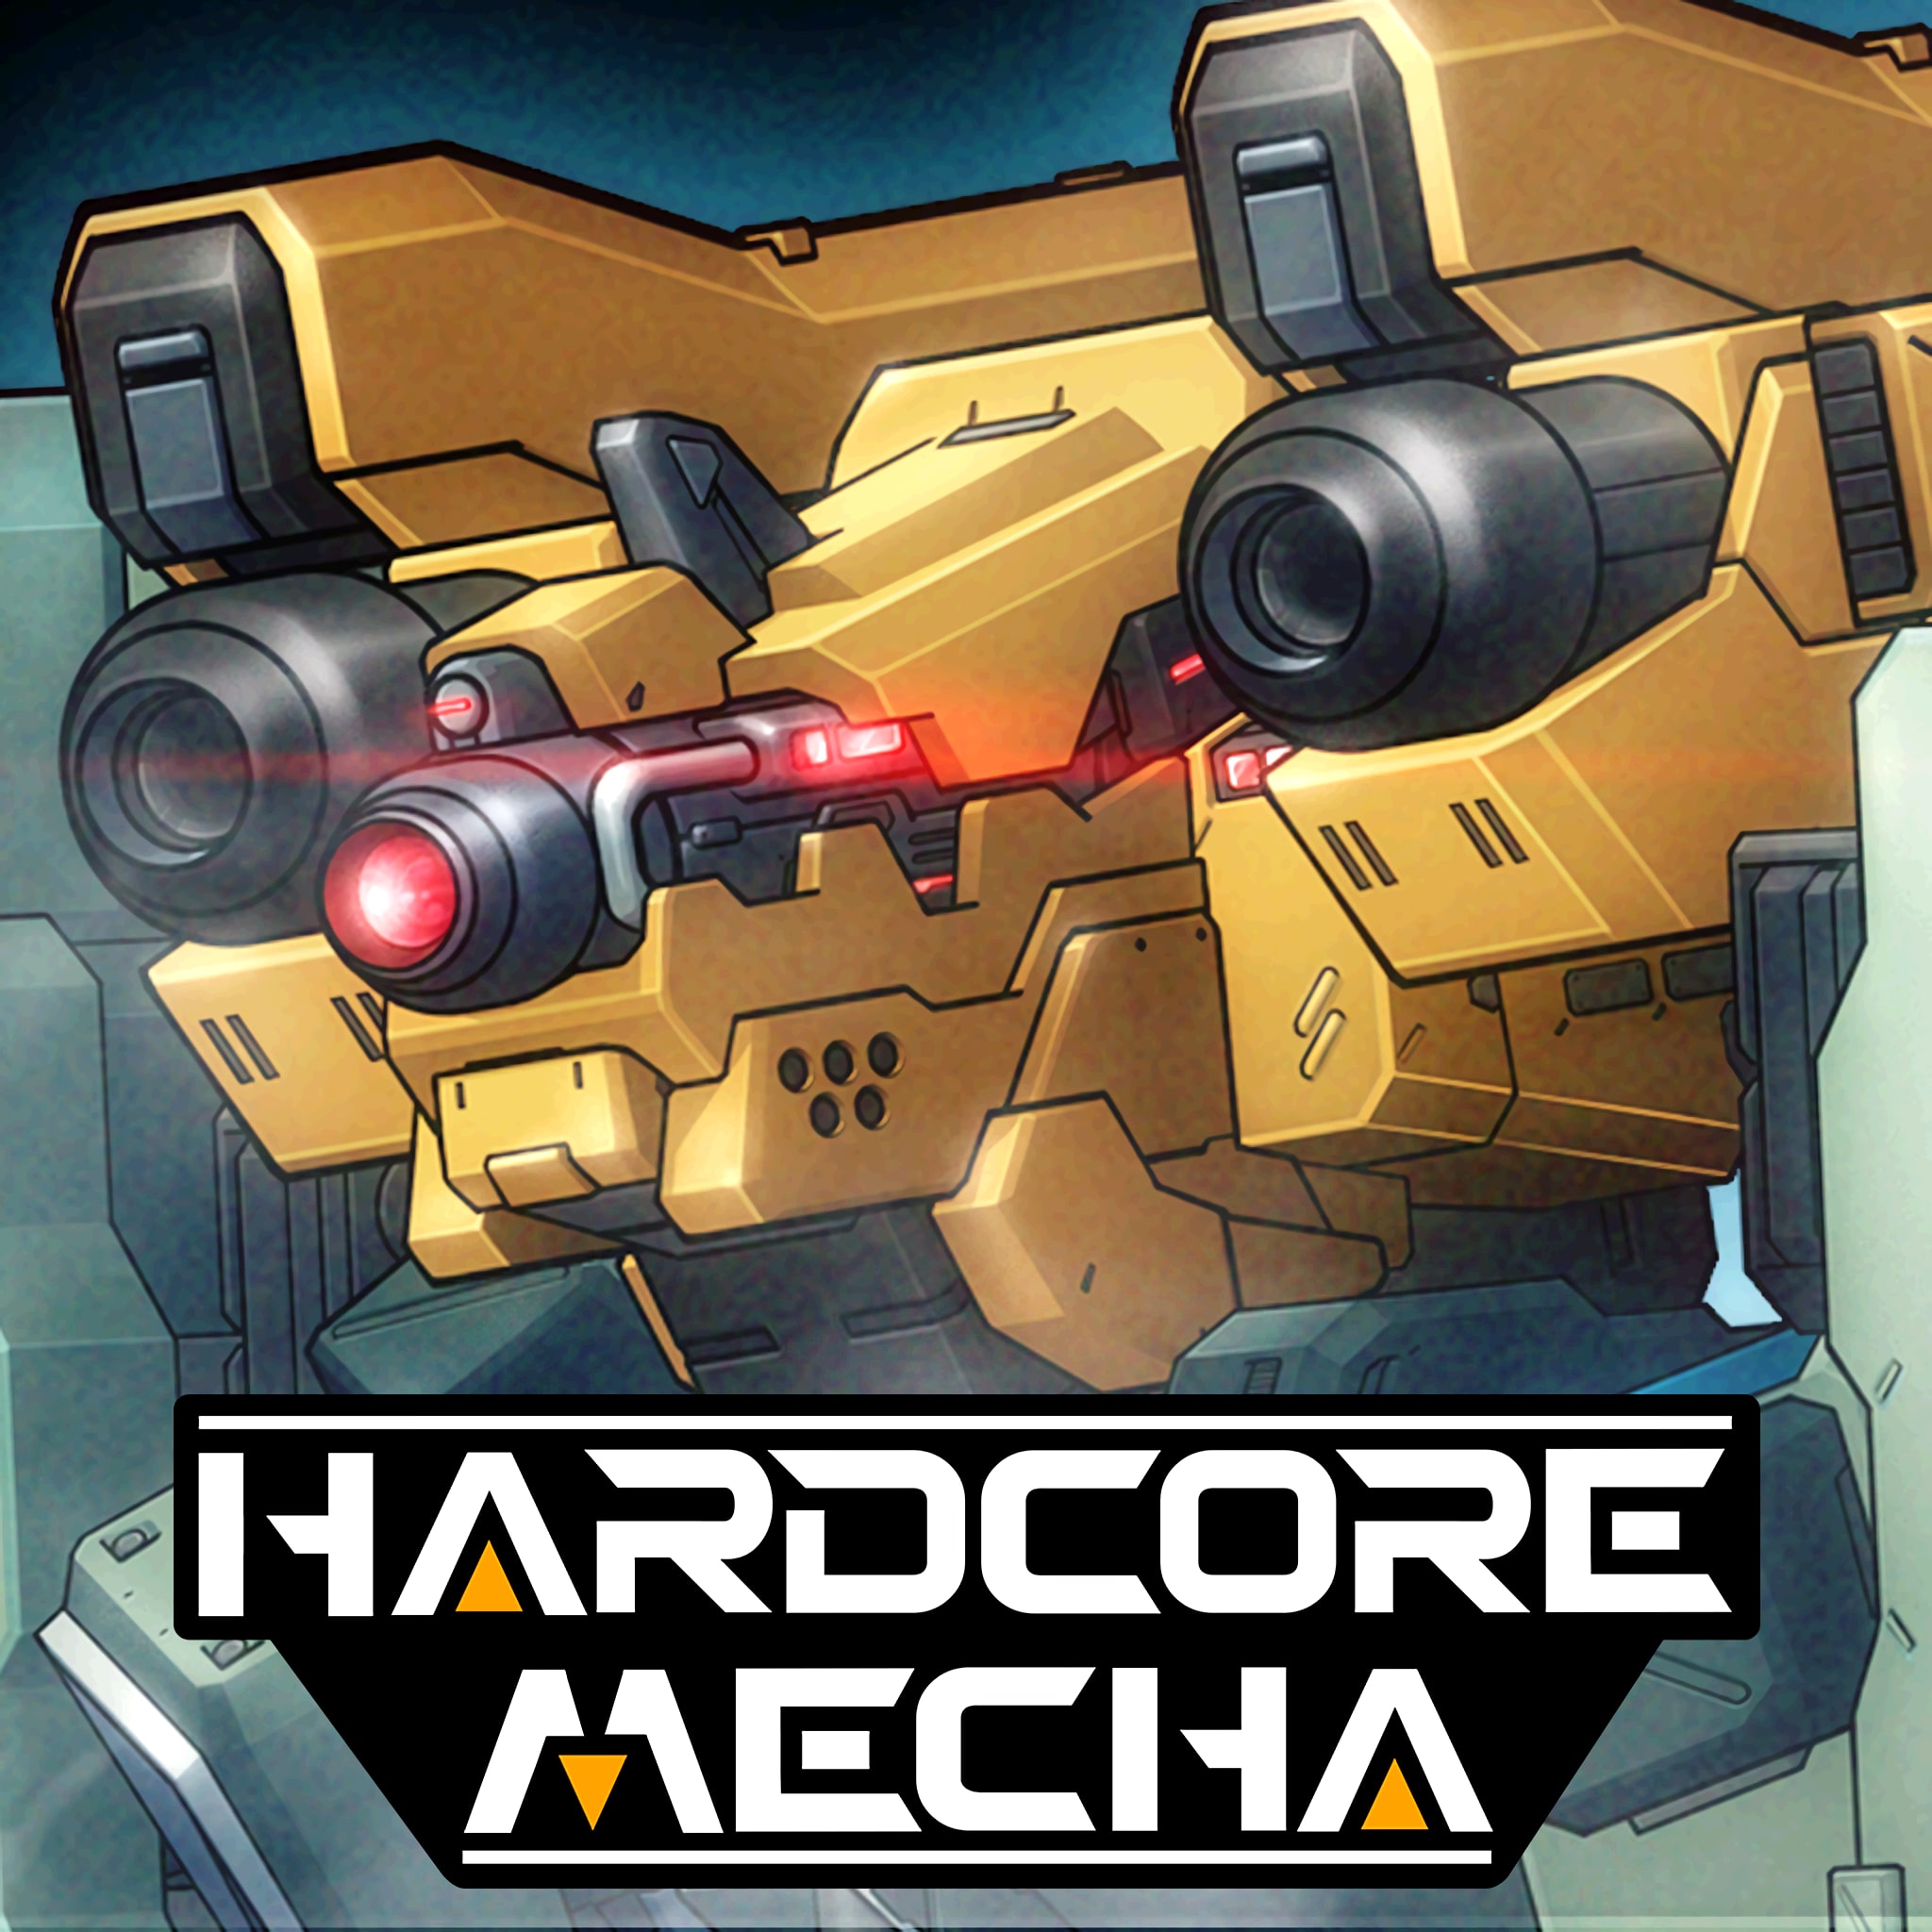 ADDITIONAL MECHA - ROUND HAMMER PARTICLE CANNON